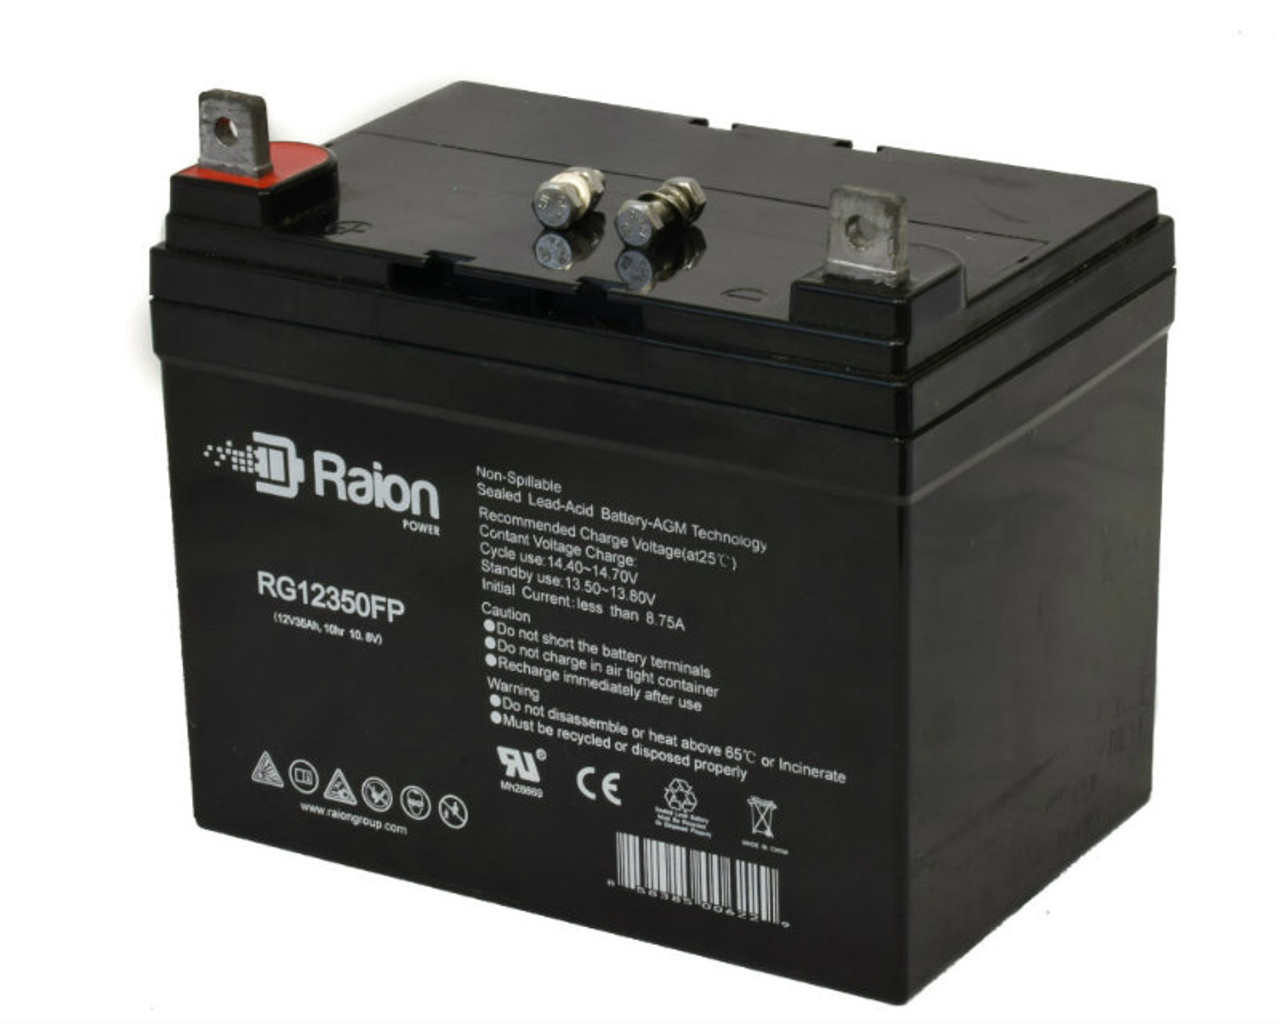 Raion Power Replacement 12V 35Ah Battery for J.I. Case & Case Ih Lawn 448 - 1 Pack